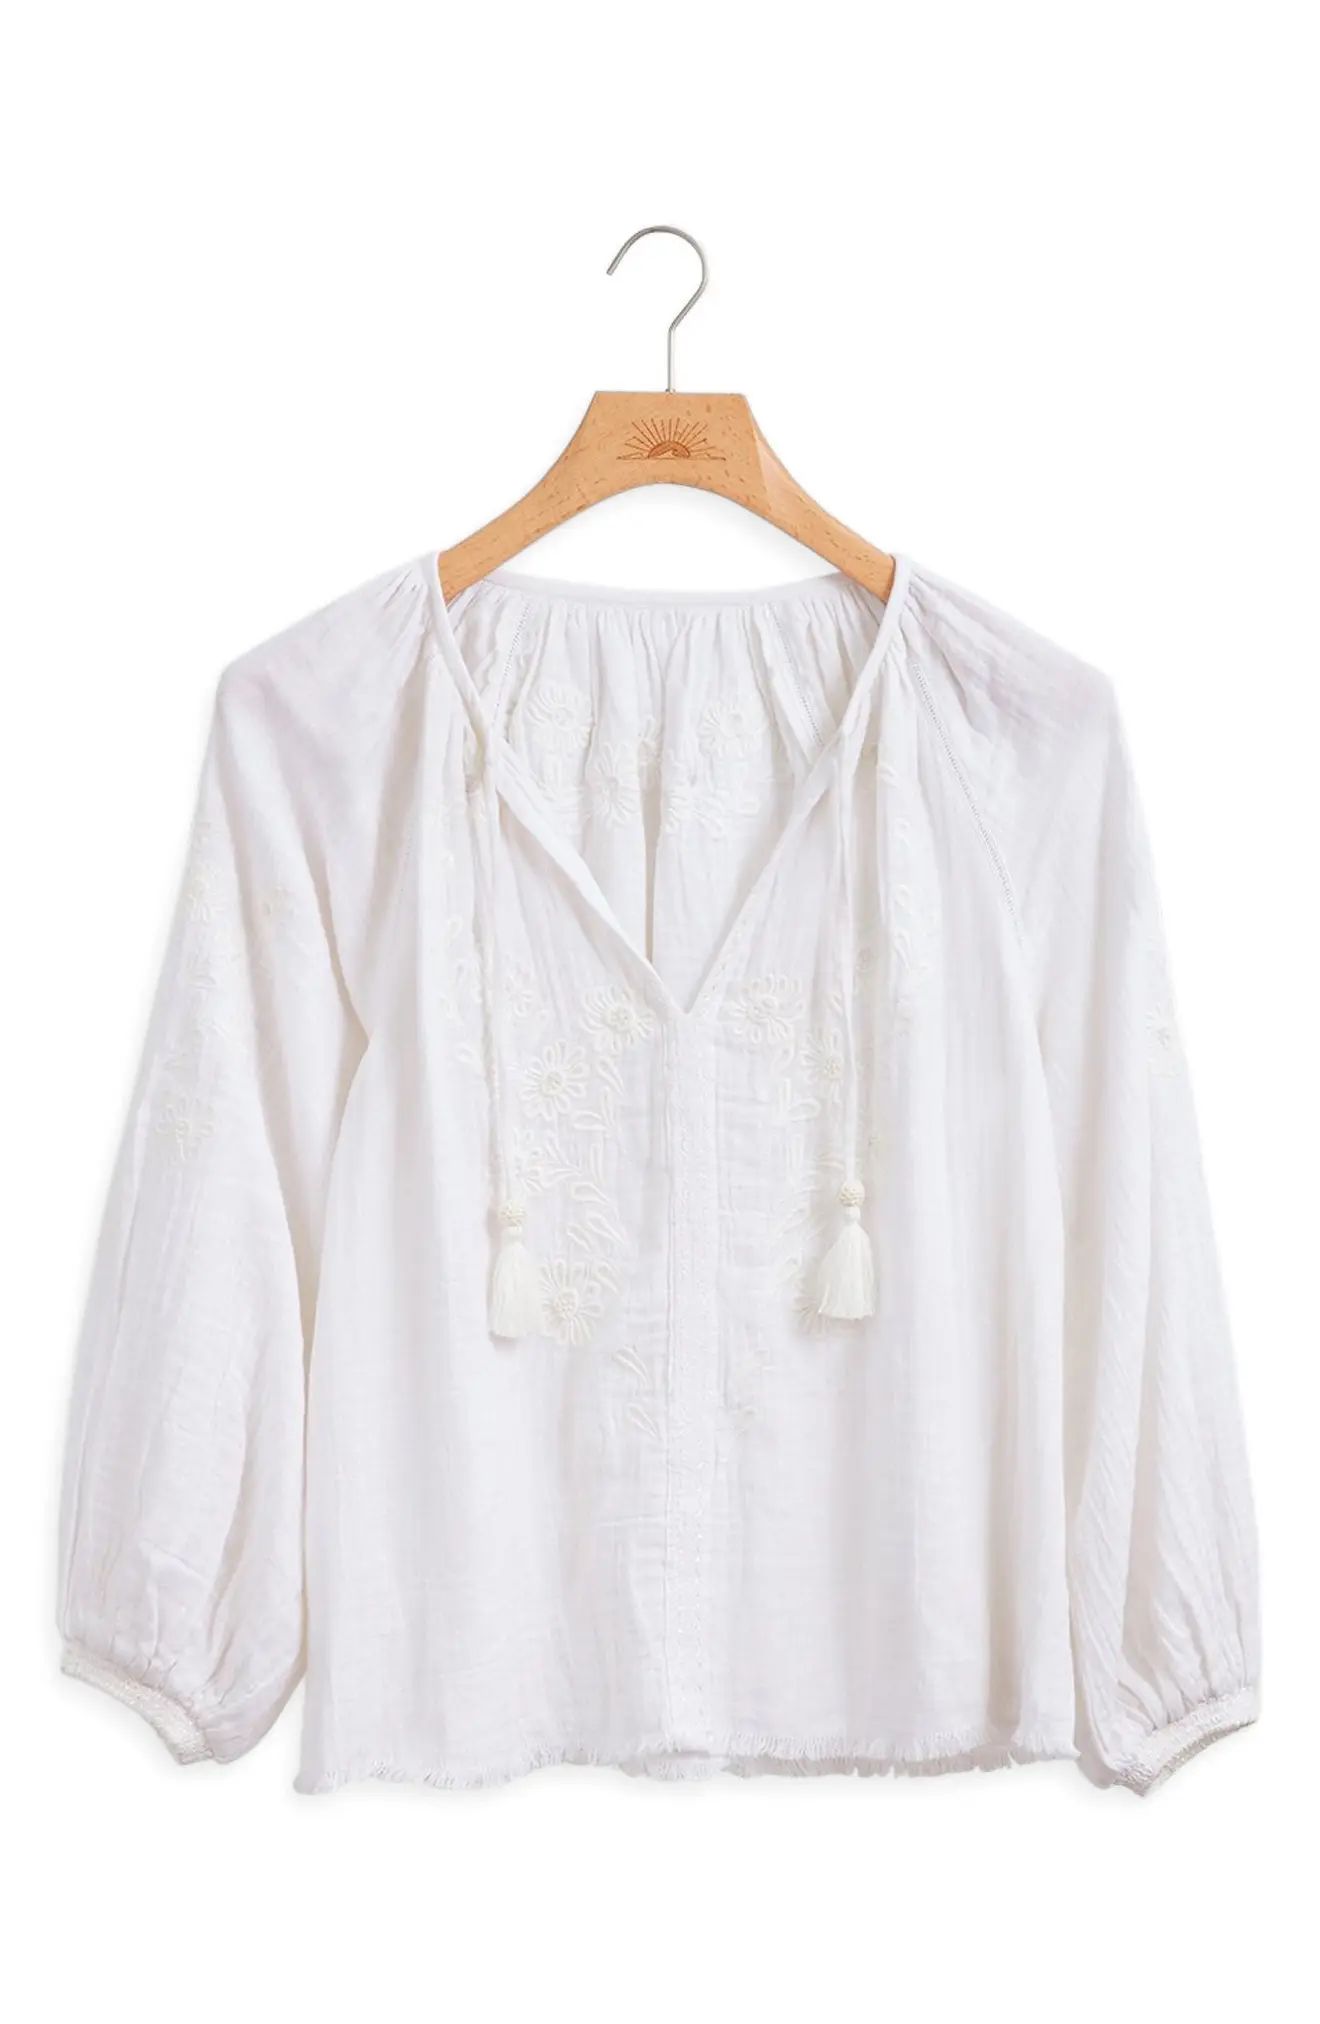 Women's Faherty Blossom Blouse, Size Large - White | Nordstrom